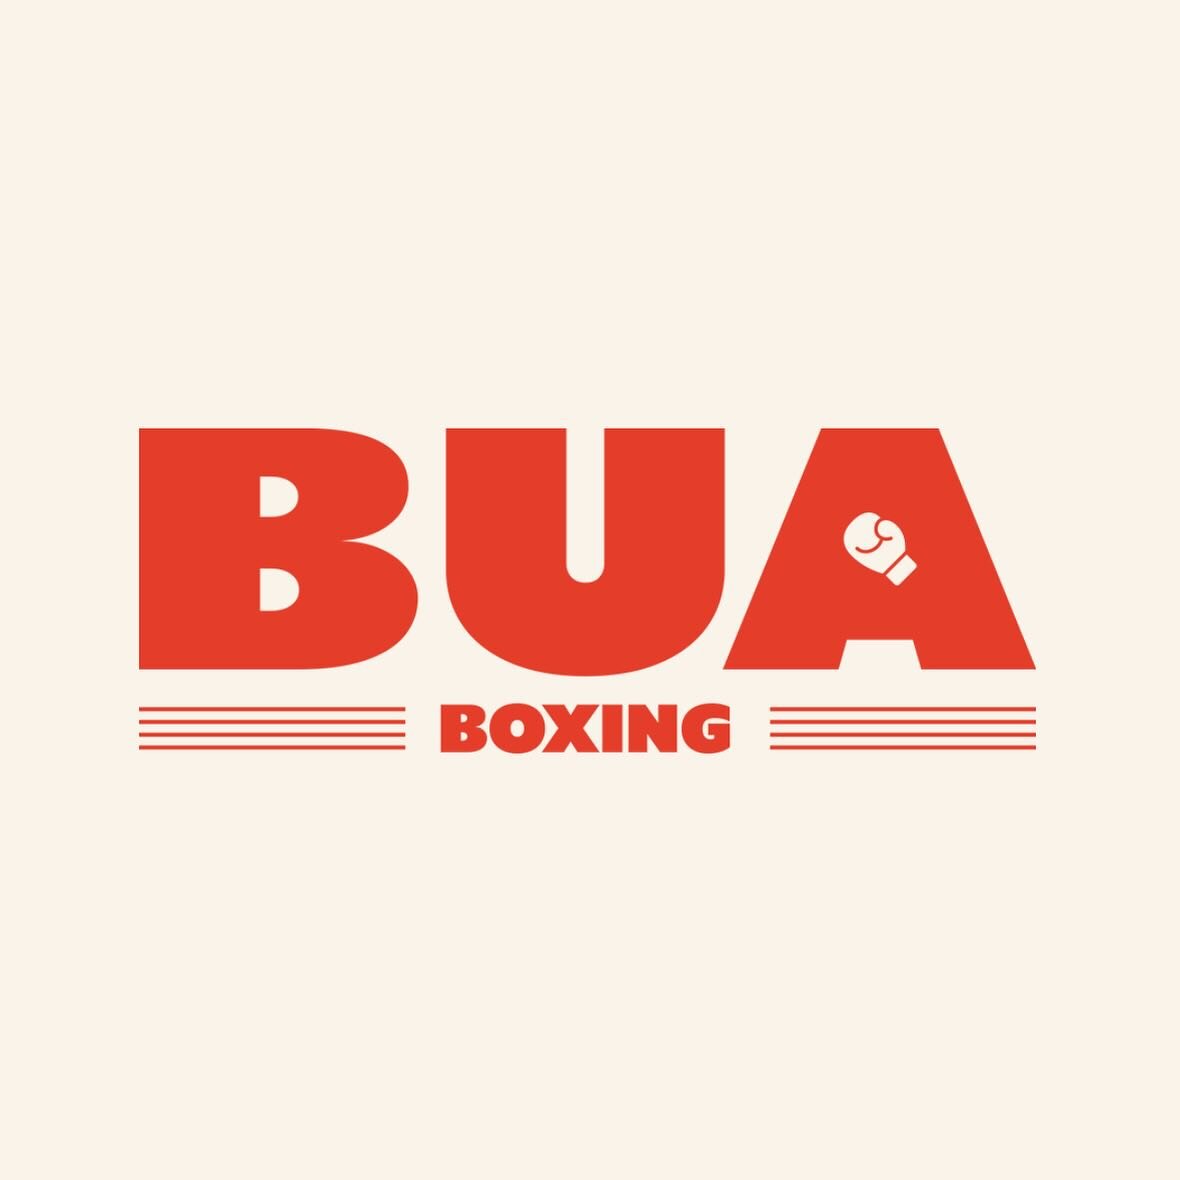 Group Classes Today at: 5pm | 6pm | 7pm

To view our full schedule + to book, visit: [buaboxing.com] 

#astoria #boxing #boxinggym #astoriaqueens #astoriapark #fitnessmotivation